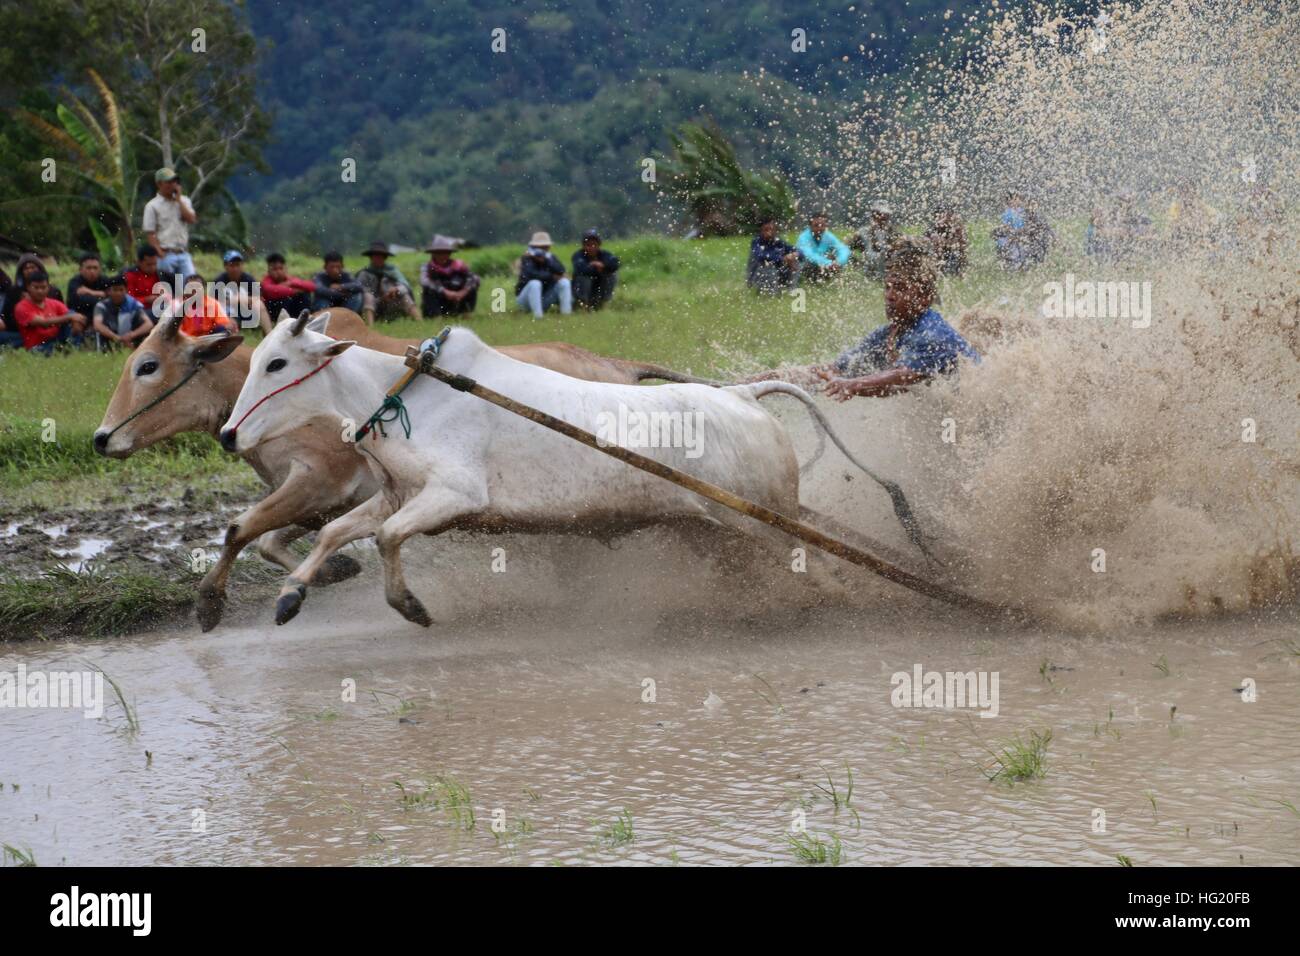 Traditional bull races in West Sumatra, Indonesia. Stock Photo